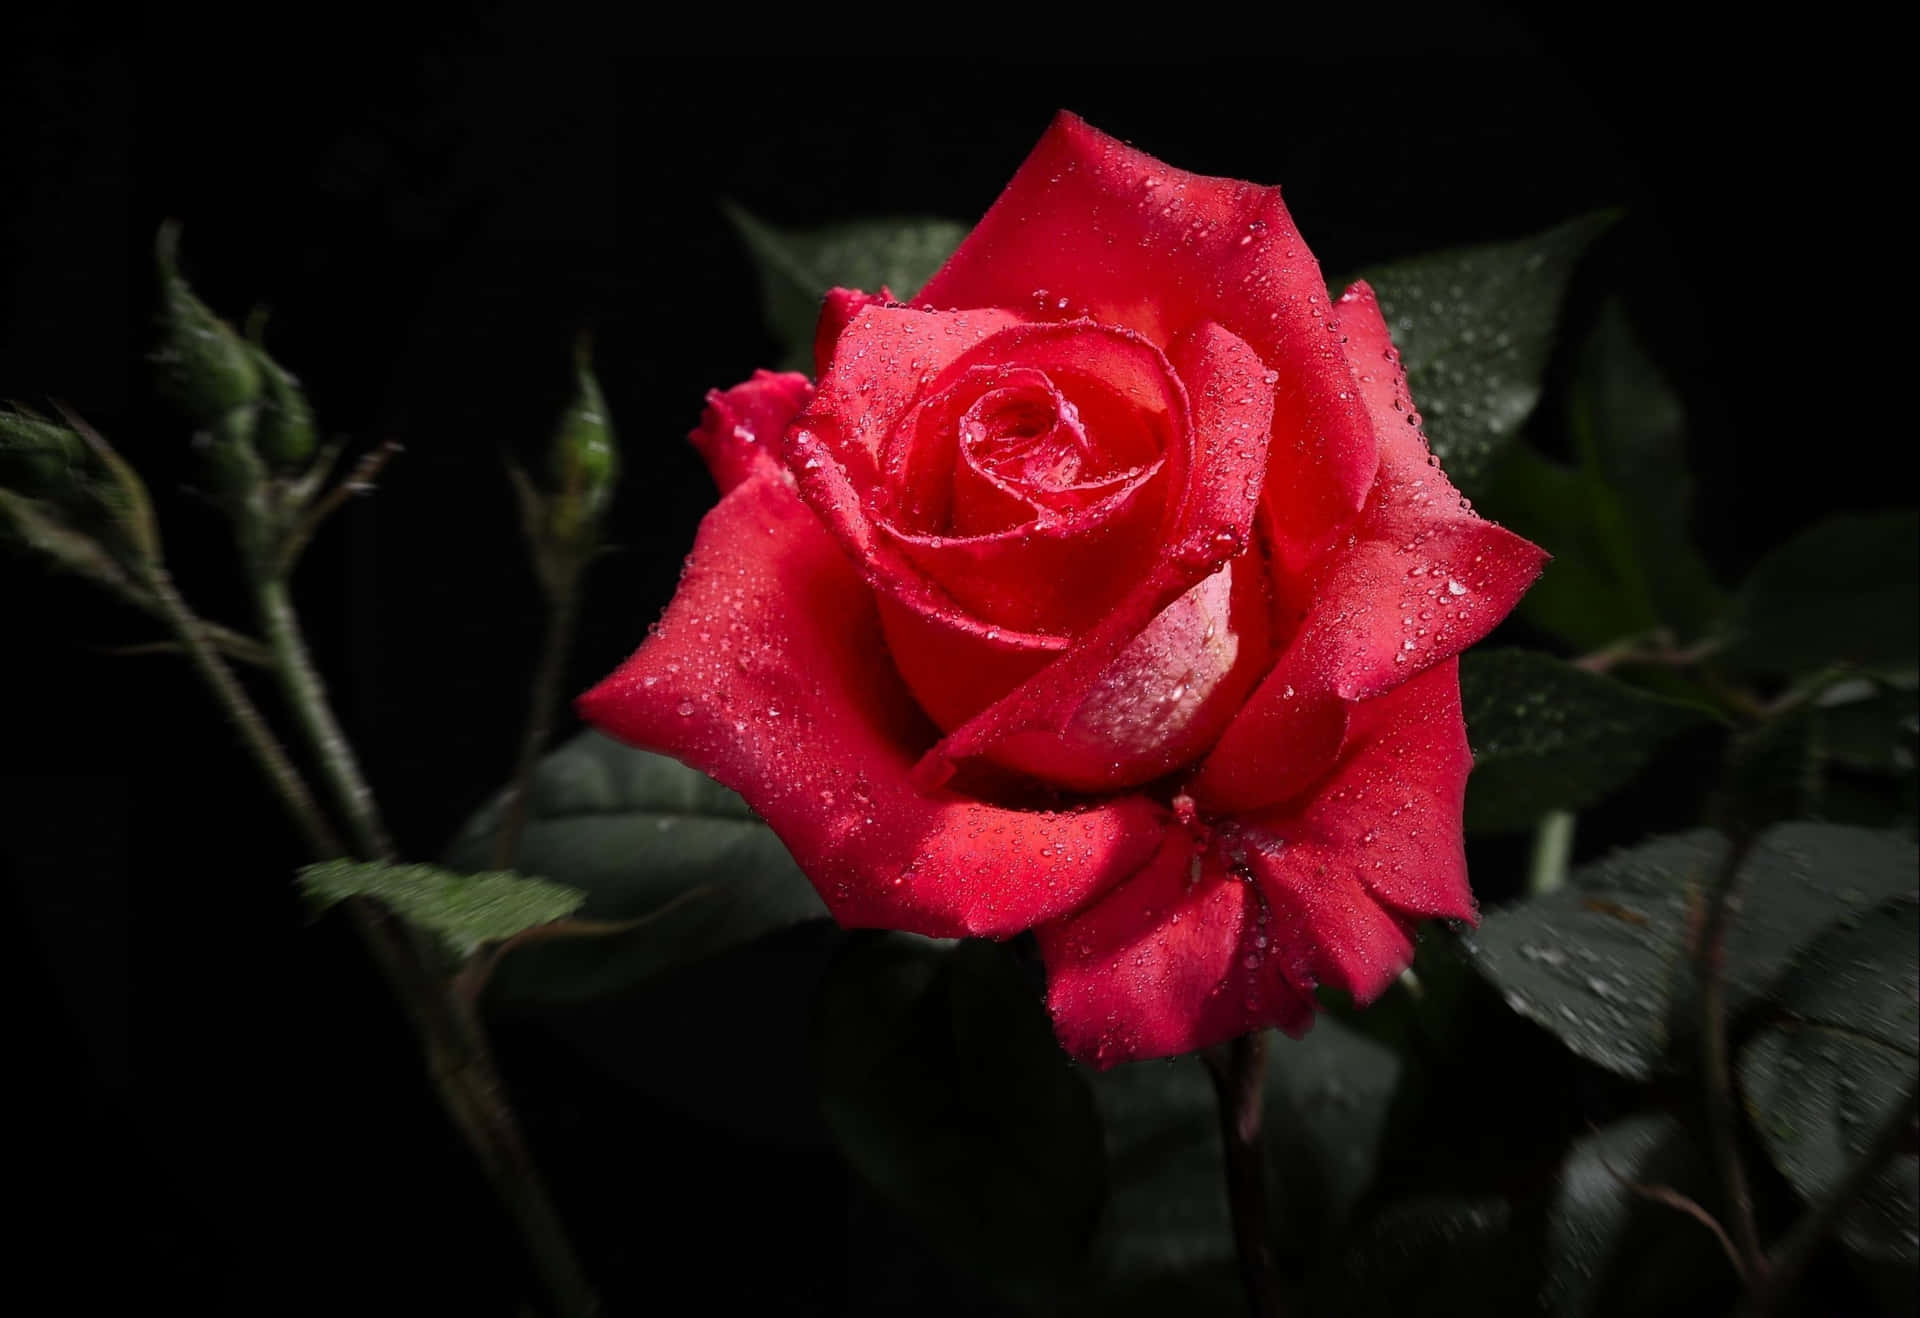 Hd Rose With Dew Drops Wallpaper